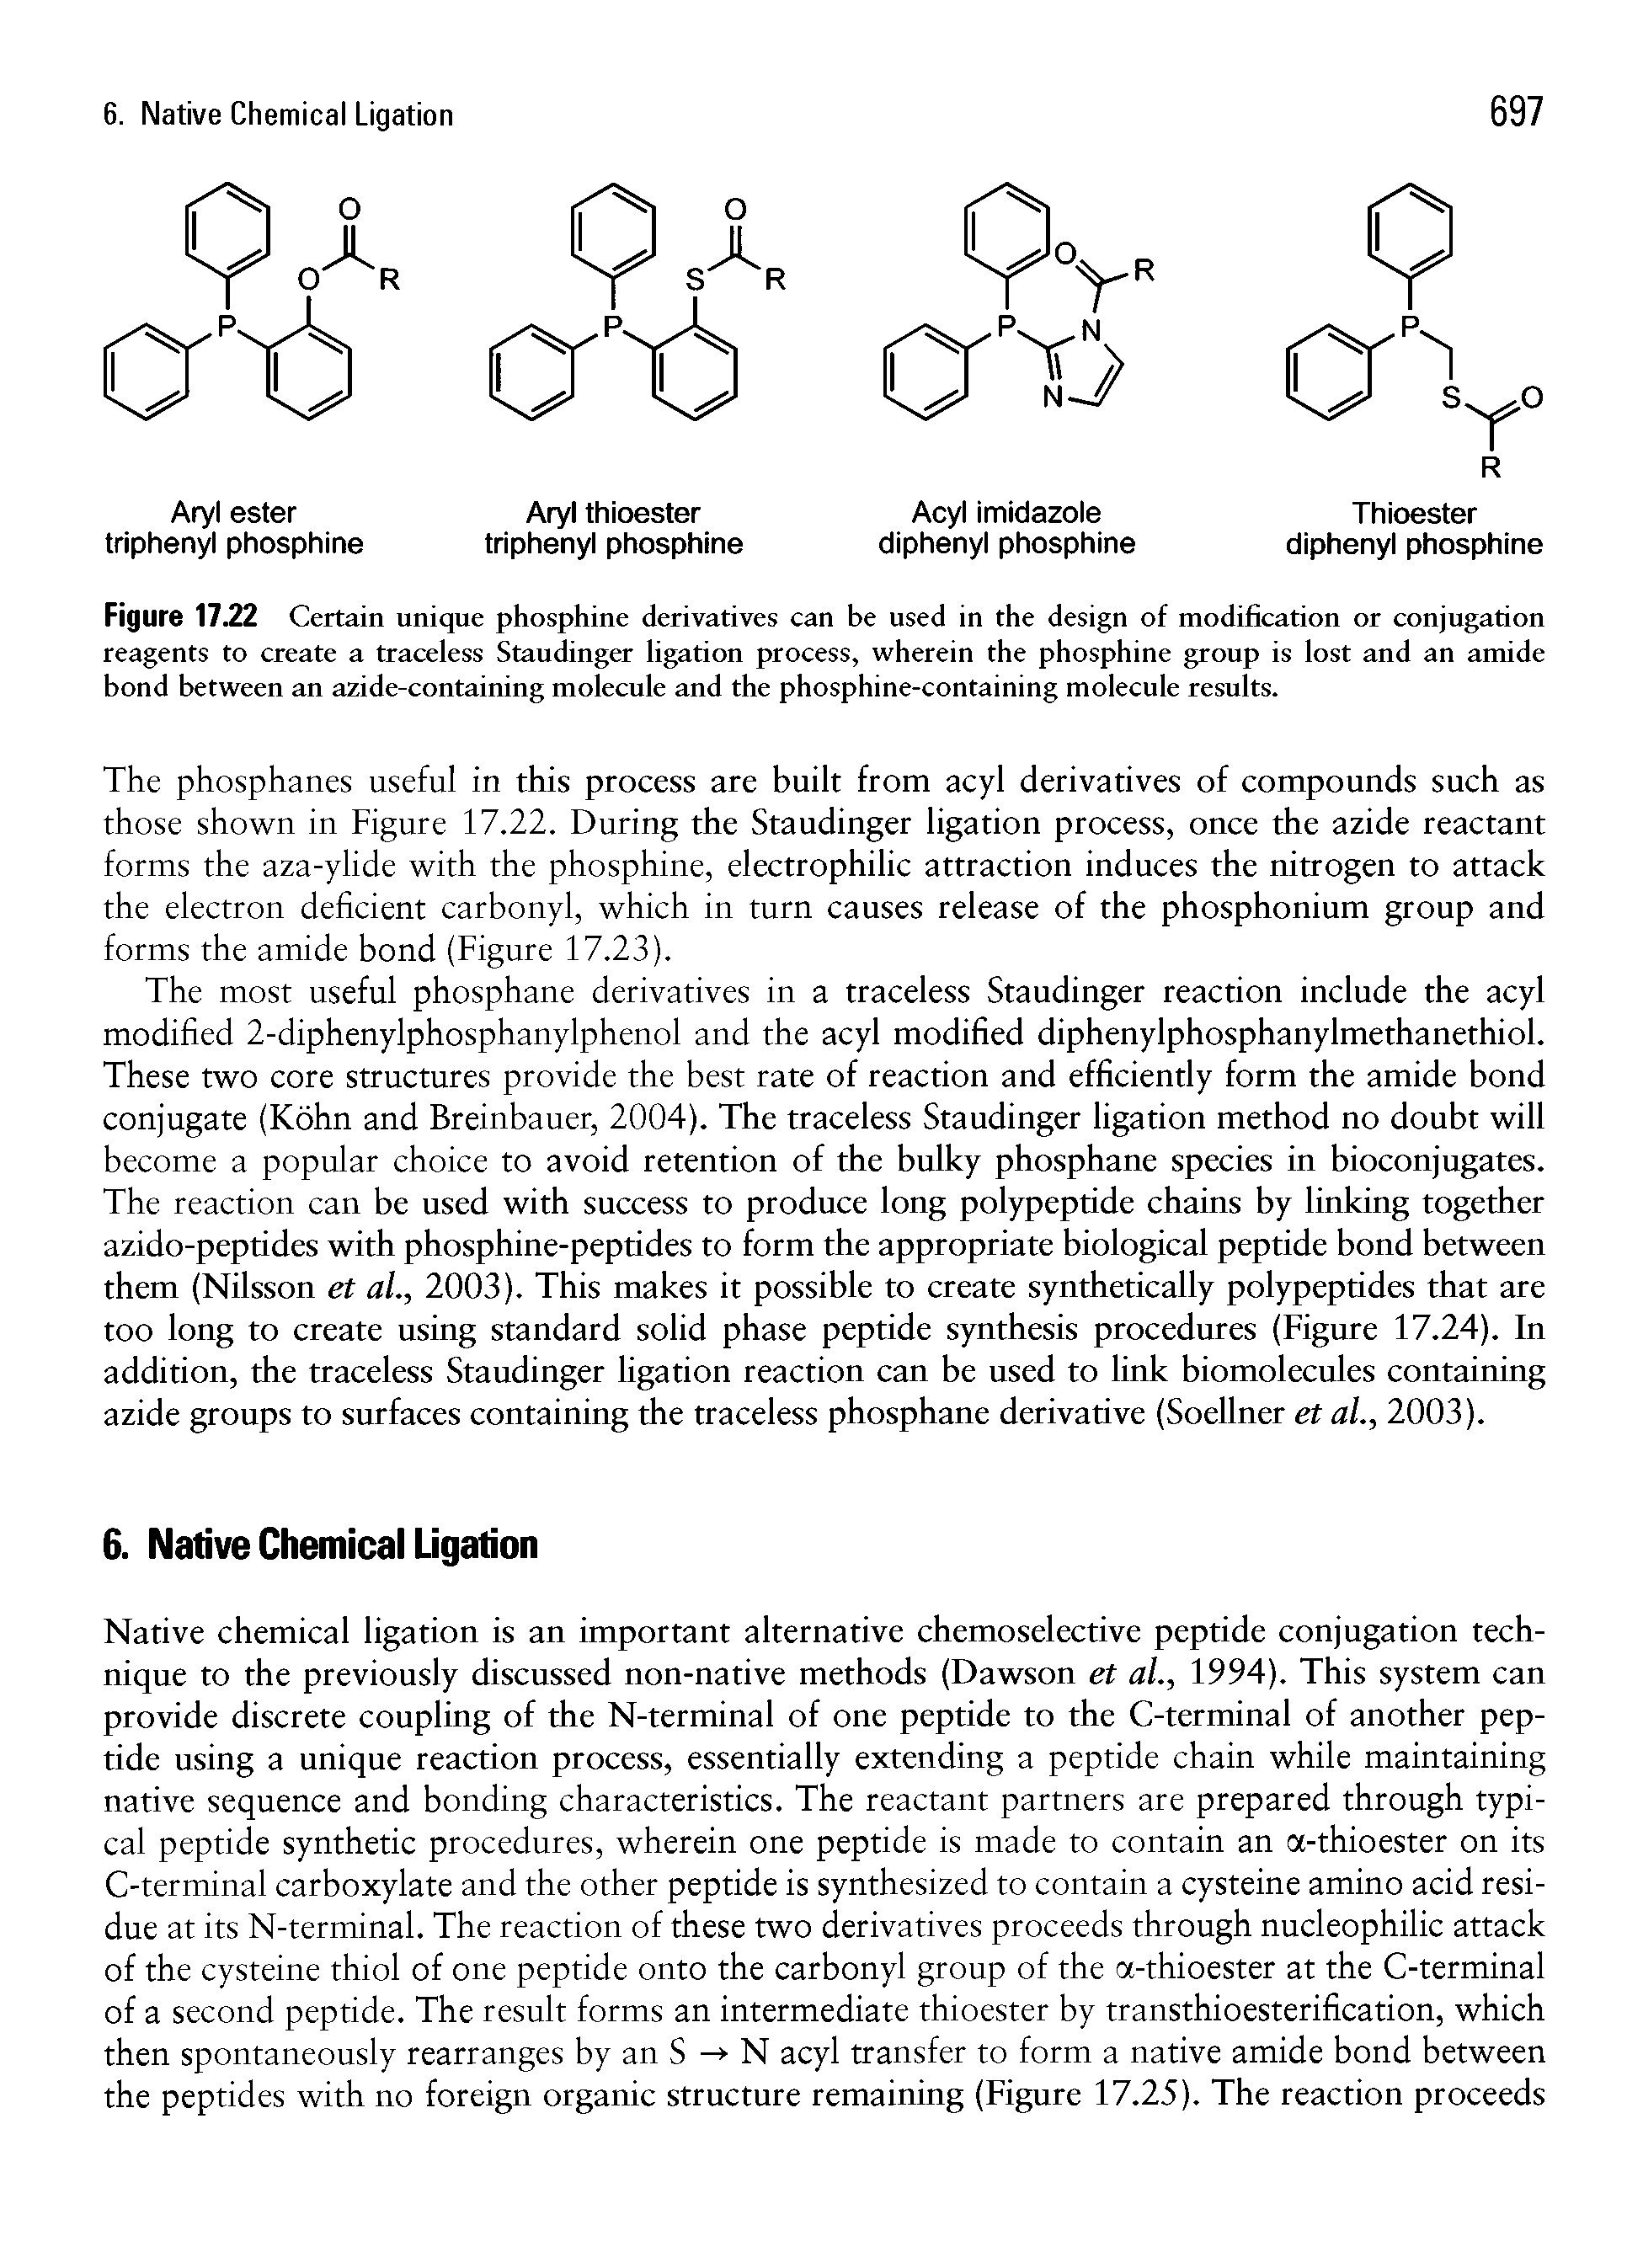 Figure 17.22 Certain unique phosphine derivatives can be used in the design of modification or conjugation reagents to create a traceless Staudinger ligation process, wherein the phosphine group is lost and an amide bond between an azide-containing molecule and the phosphine-containing molecule results.